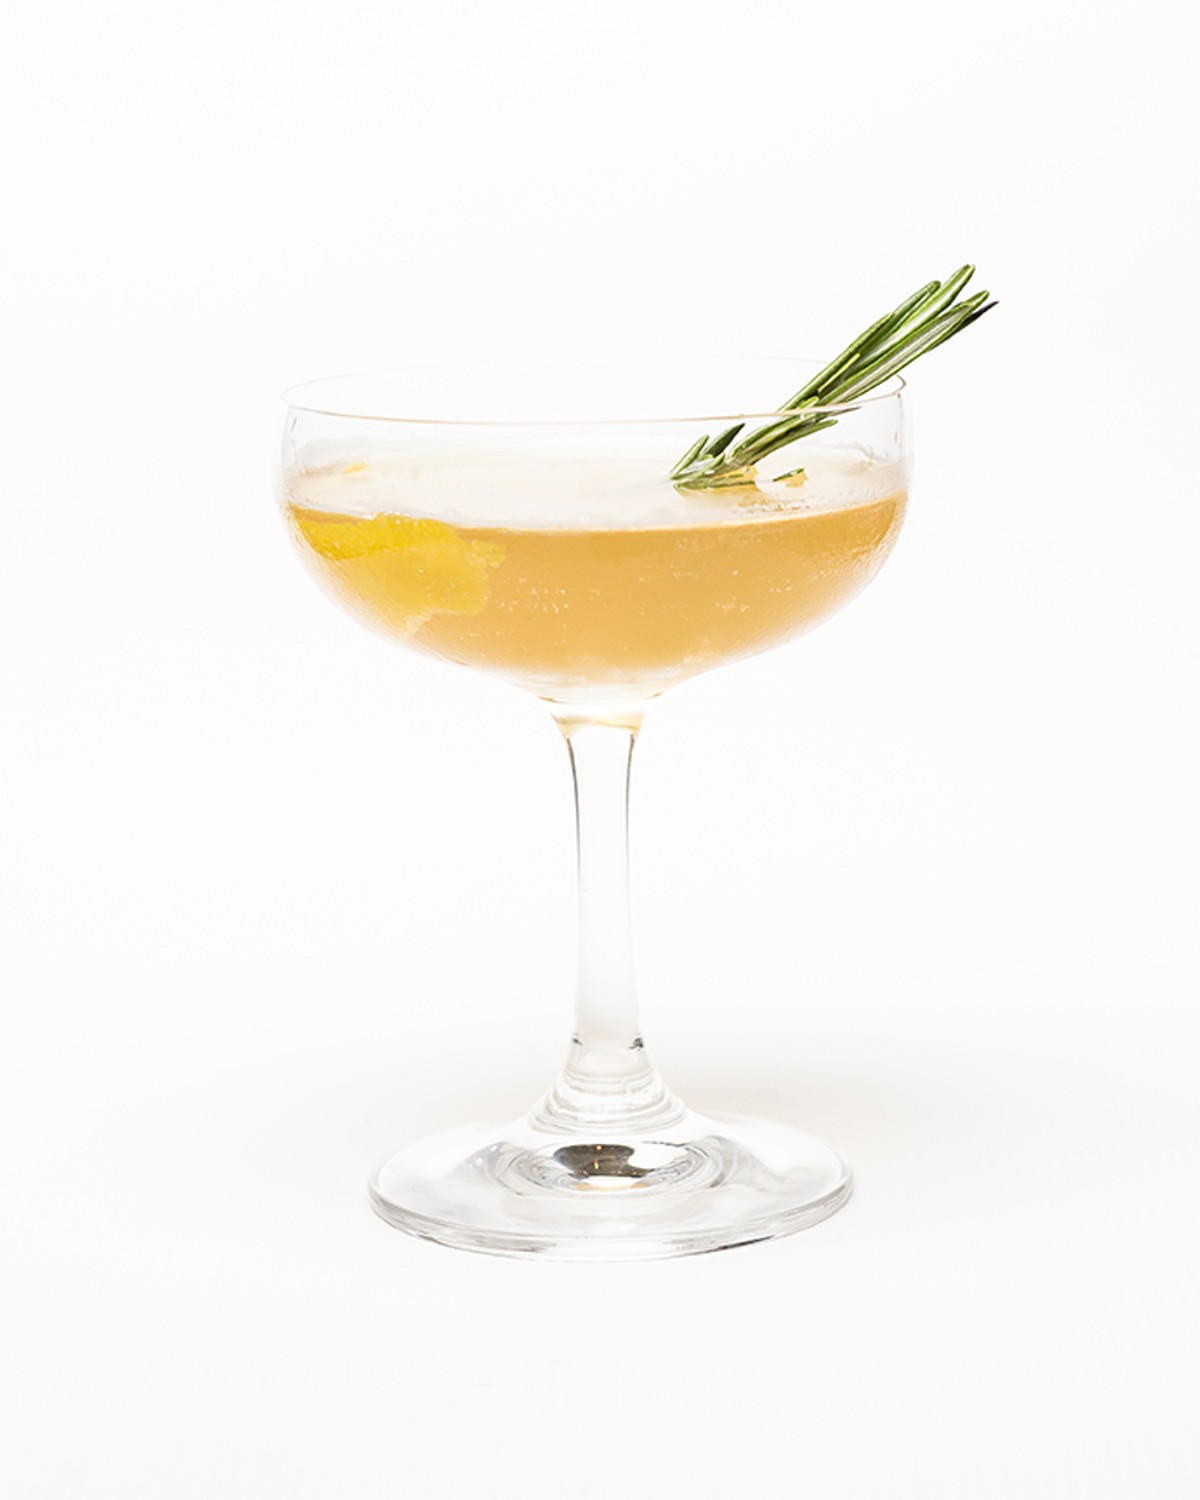 Culinary cocktails: Smokey Old Tom